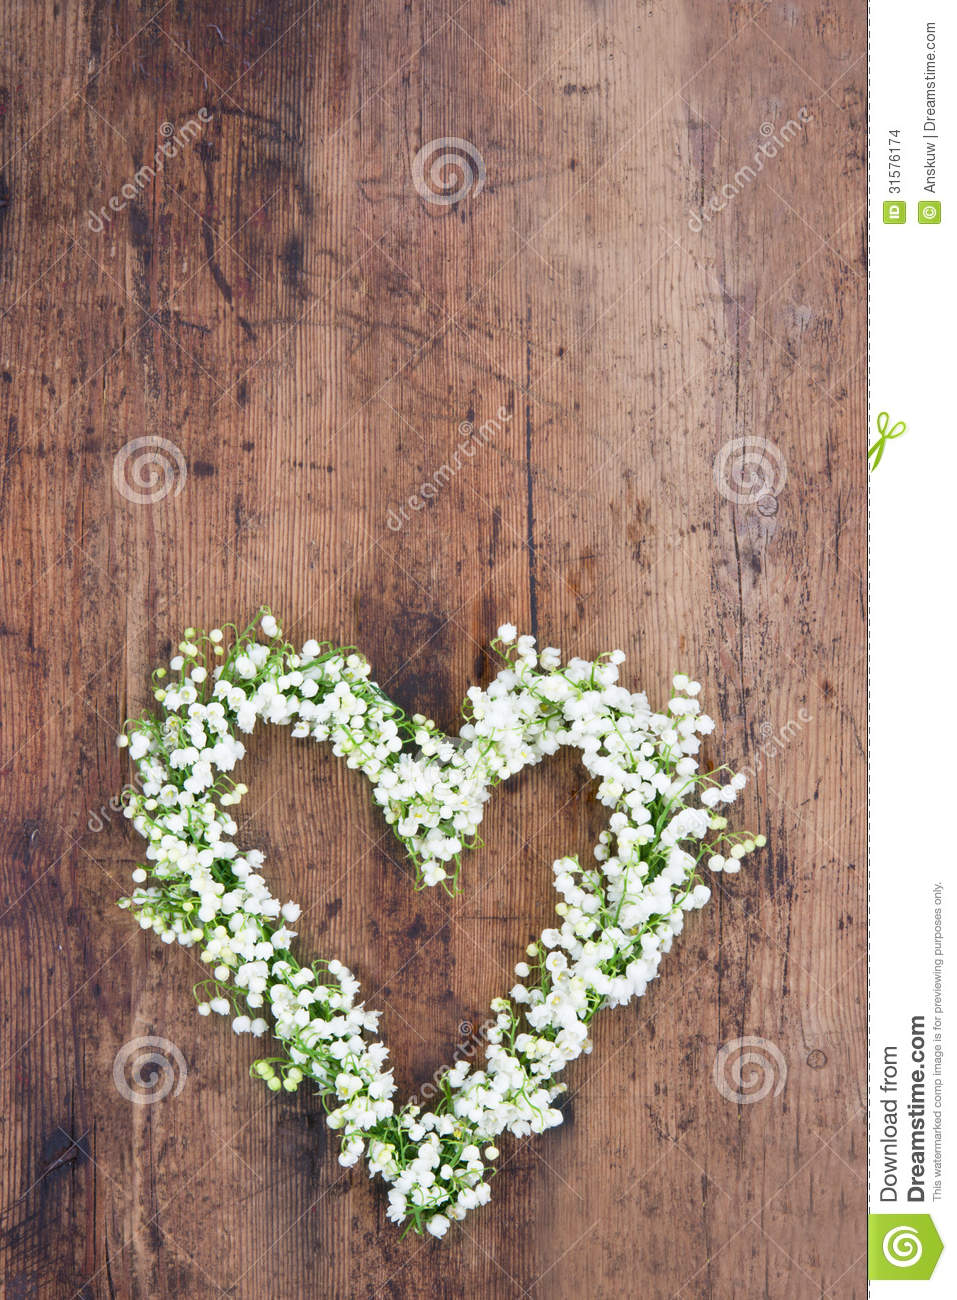 Heart Shaped Flower Wreath On Rustic Background Stock Images   Image